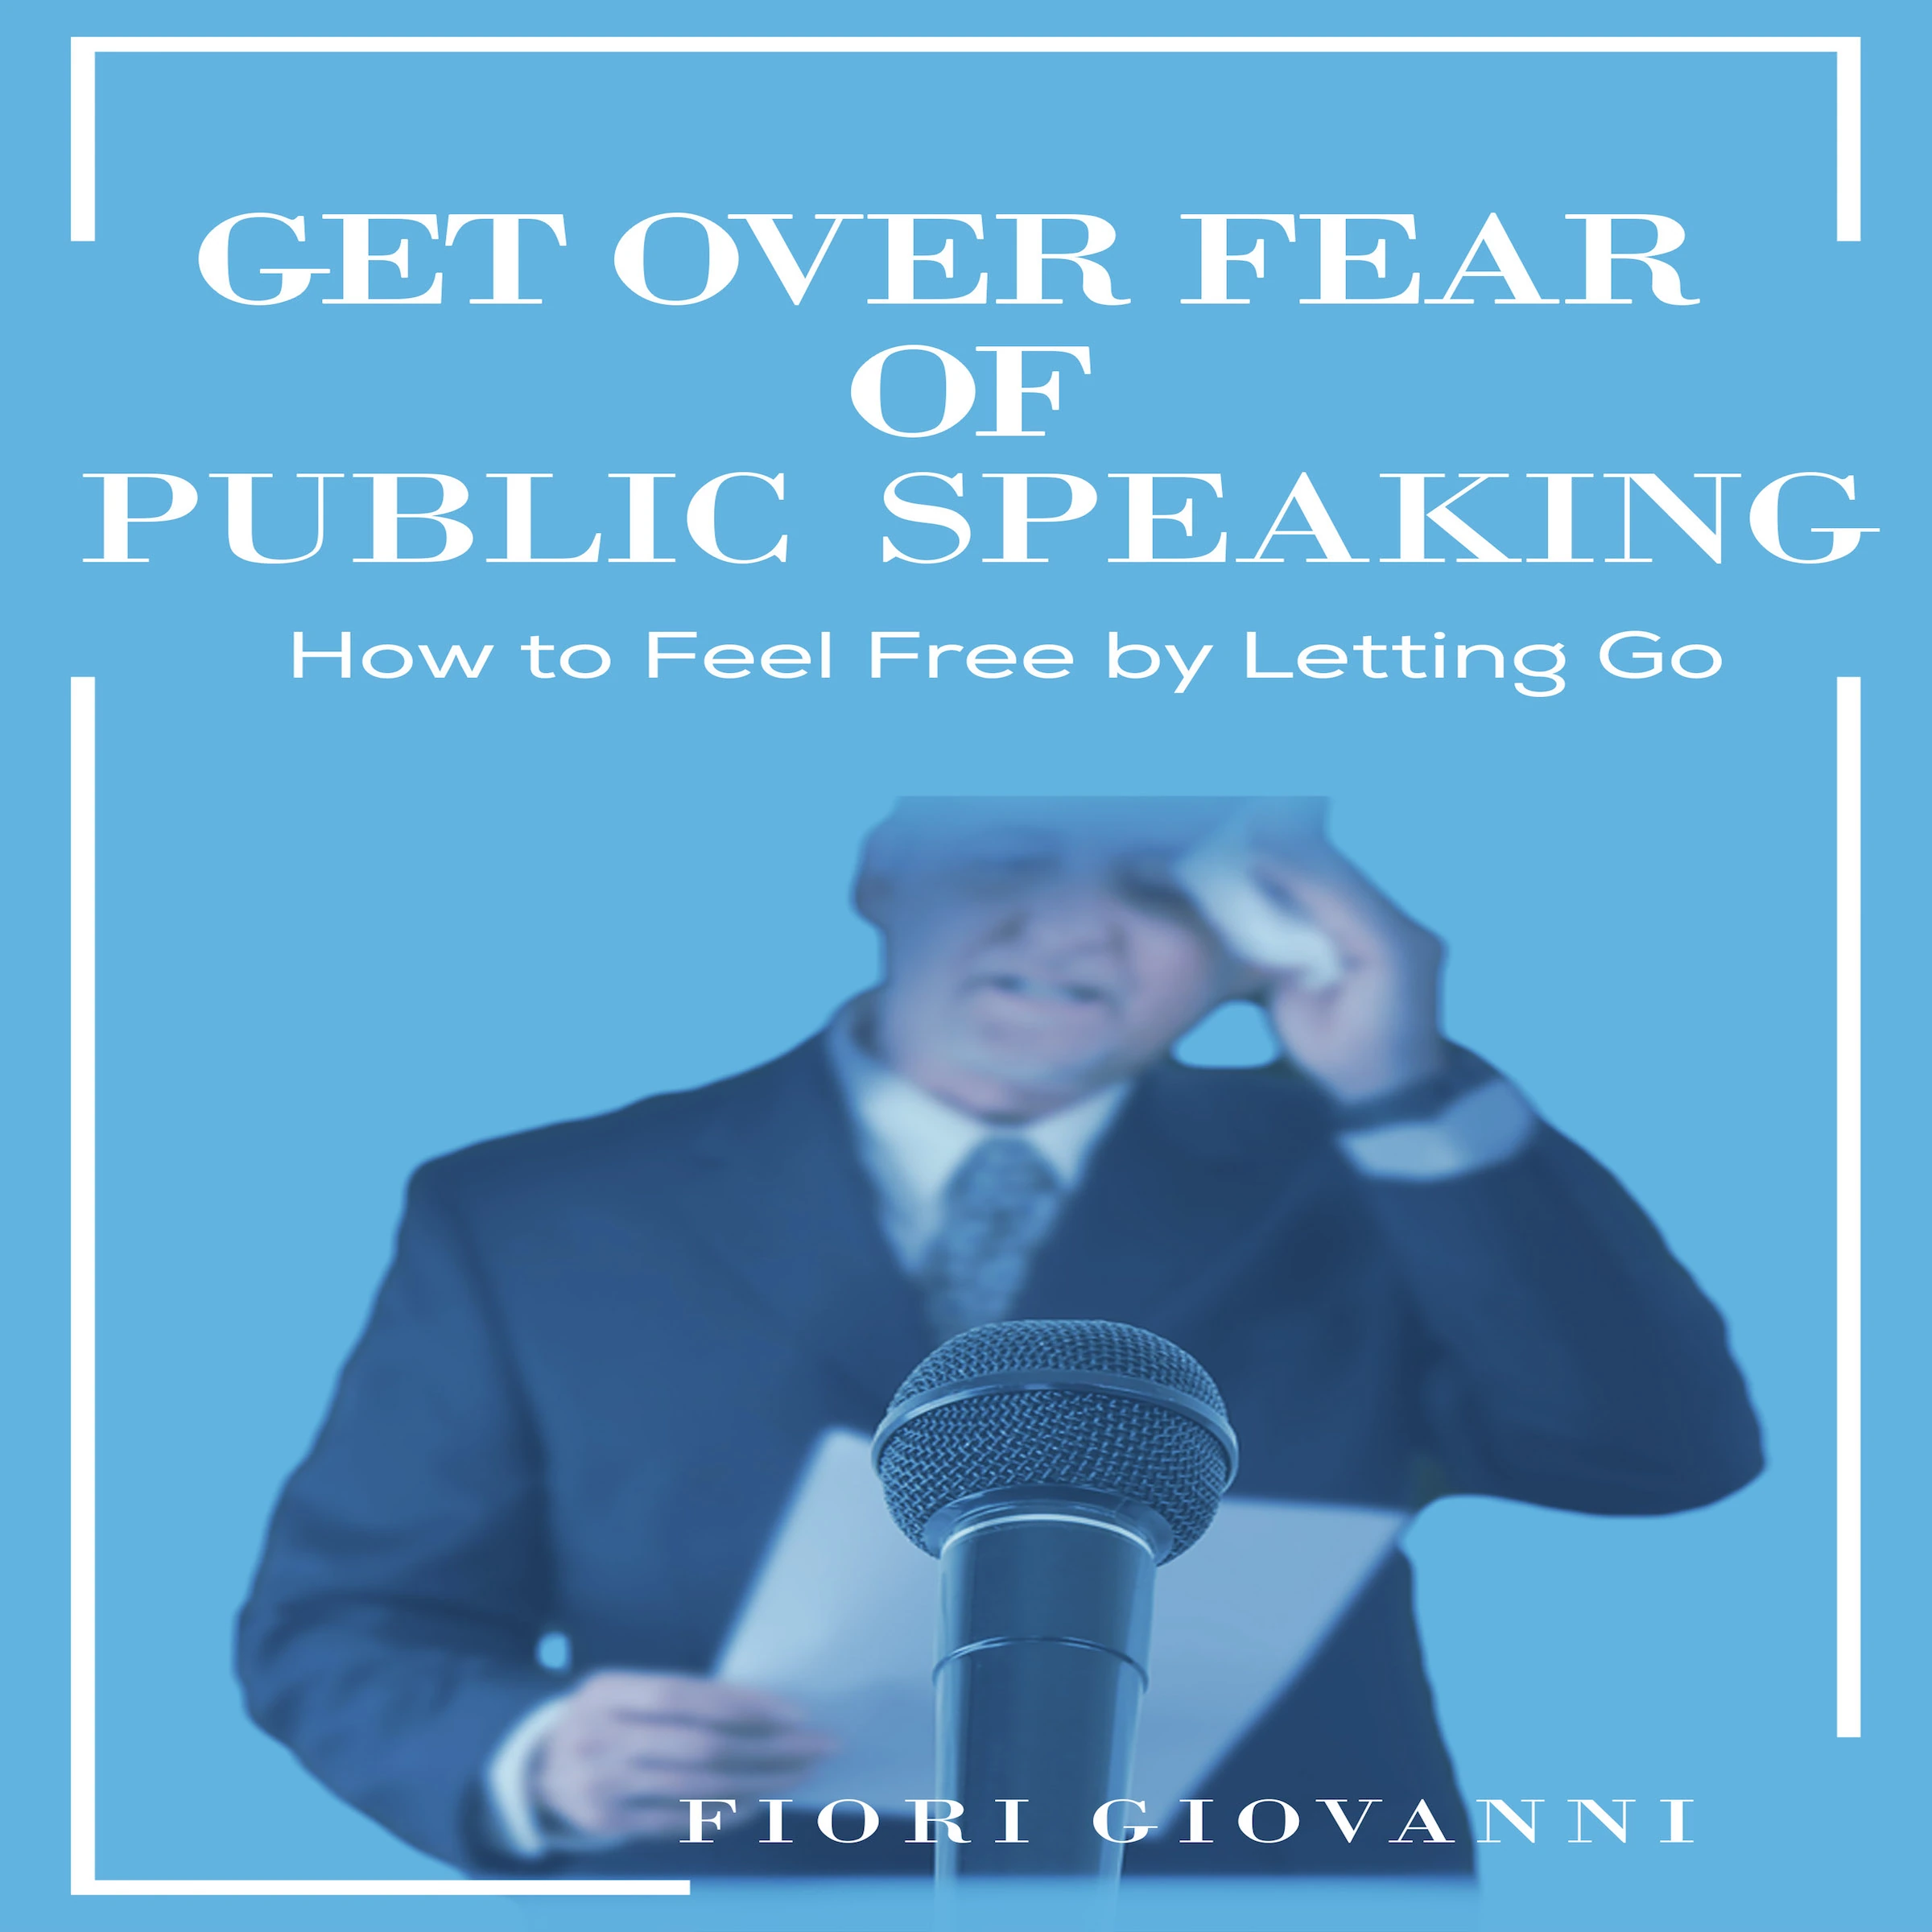 Get Over Fear of Public Speaking Audiobook by Fiori Giovanni